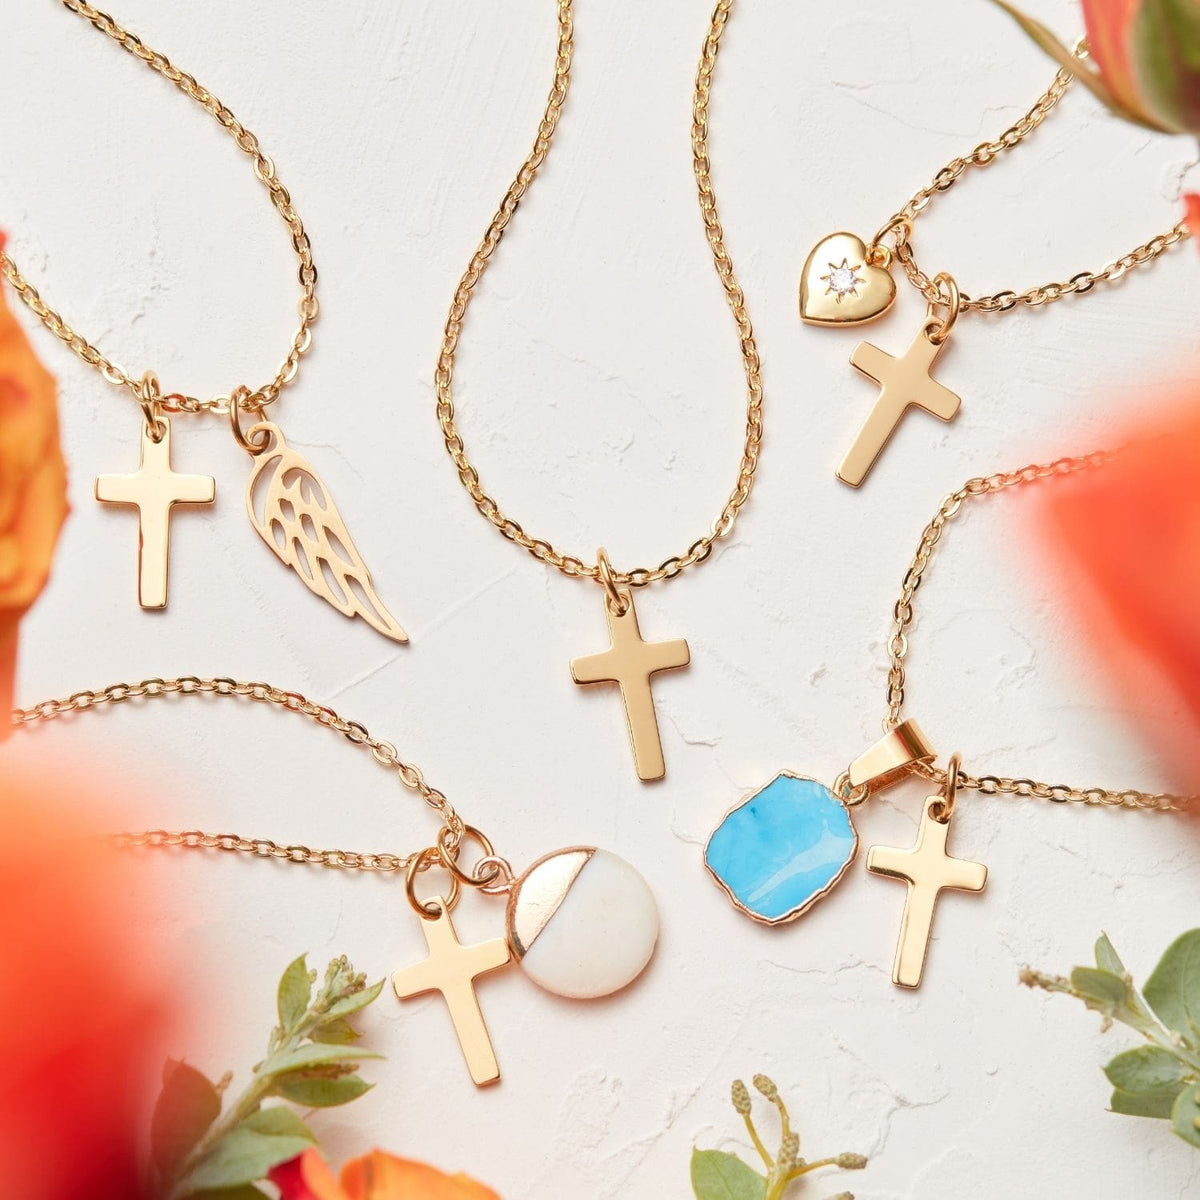 Grandmother &amp; Granddaughter | Special Bond That Spans the Years | Cross Necklace